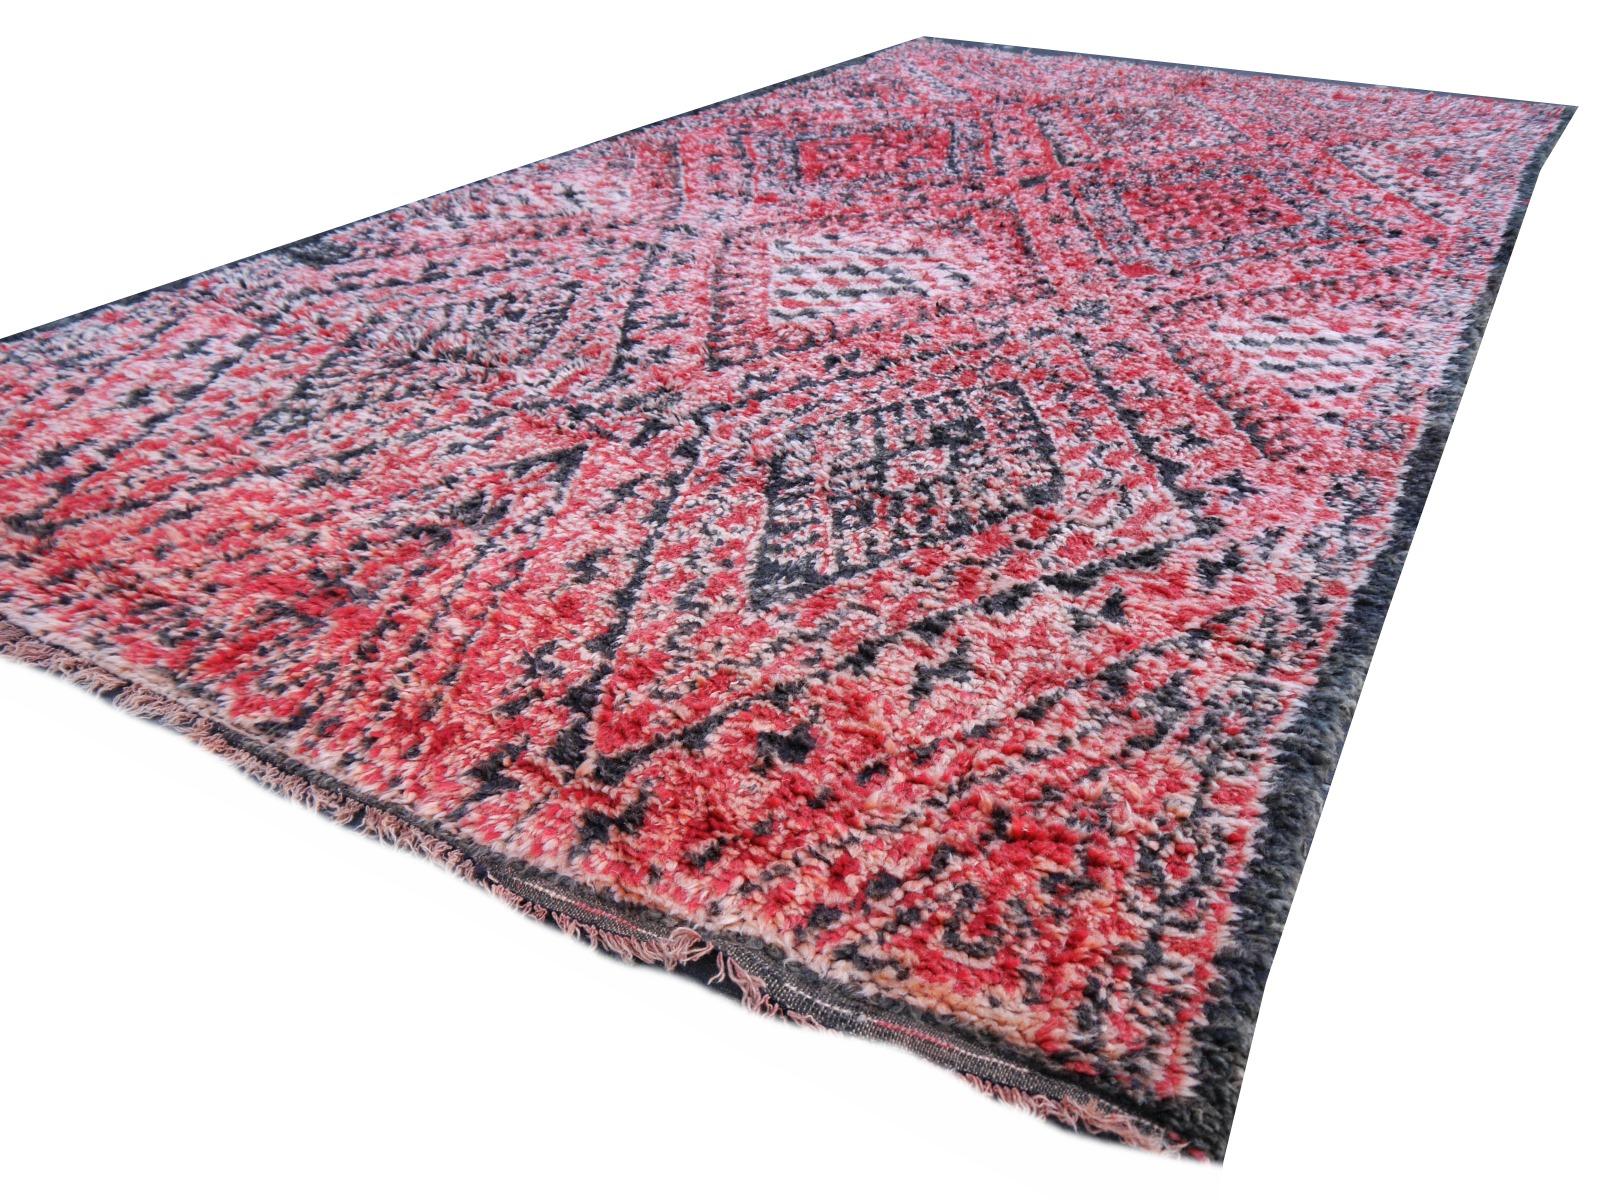 Tribal Moroccan Vintage Rug North African Diamond Design Wool Red Pink Charcoal White For Sale